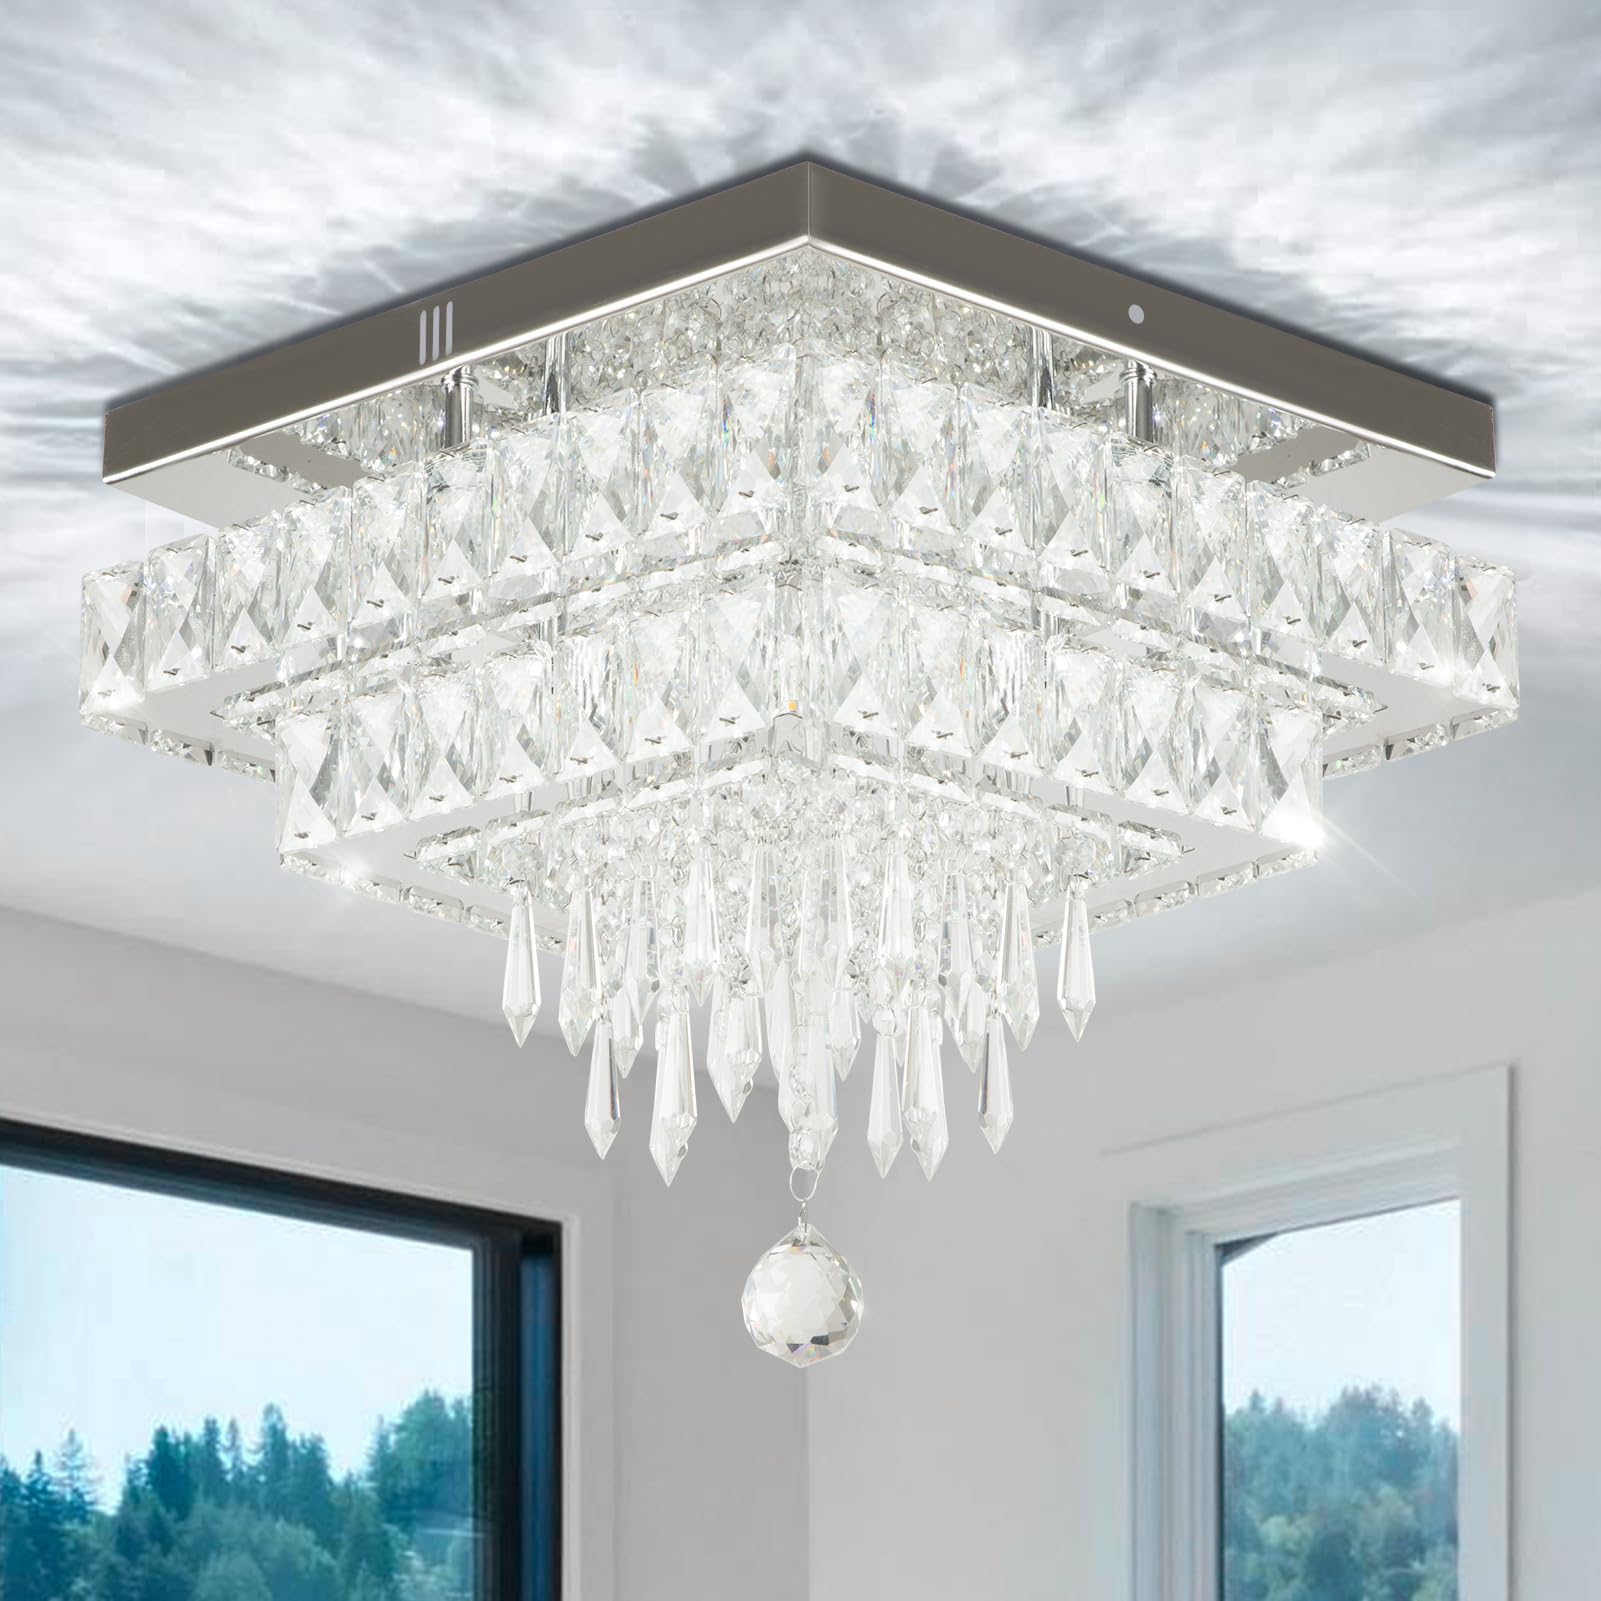 Finktonglan Crystal Chandeliers, 13'' Square LED Ceiling Light with Multilayer Crystal, Modern Flush Mount Ceiling Light for Dining Room, Bedrooms, Entryway, Living Room, 6500K White